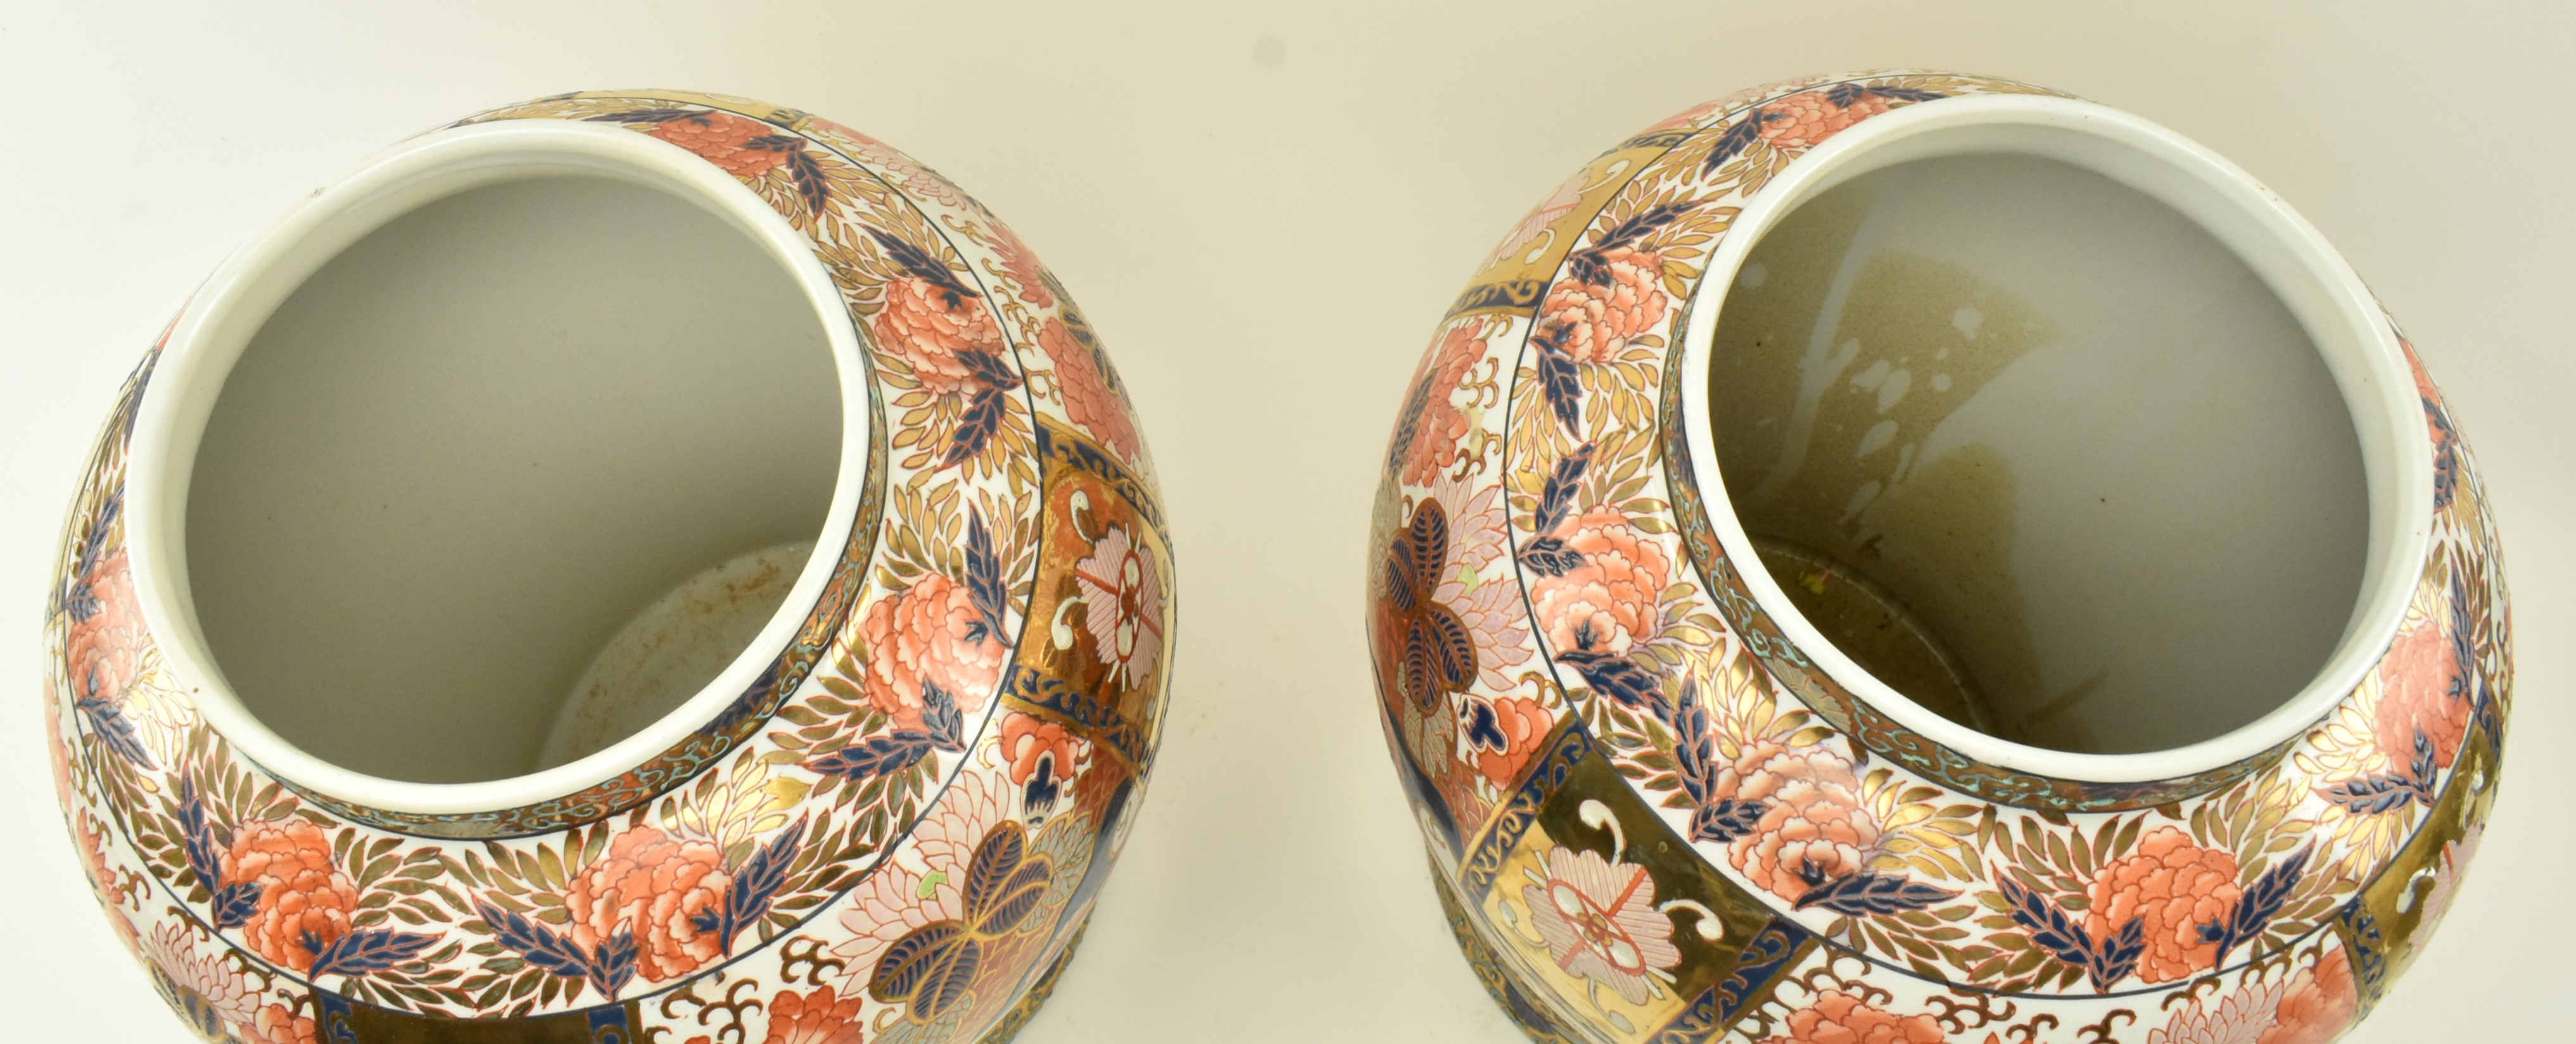 PAIR OF ROYAL CROWN DERBY STYLE LIDDED BALUSTER VASES - Image 4 of 6